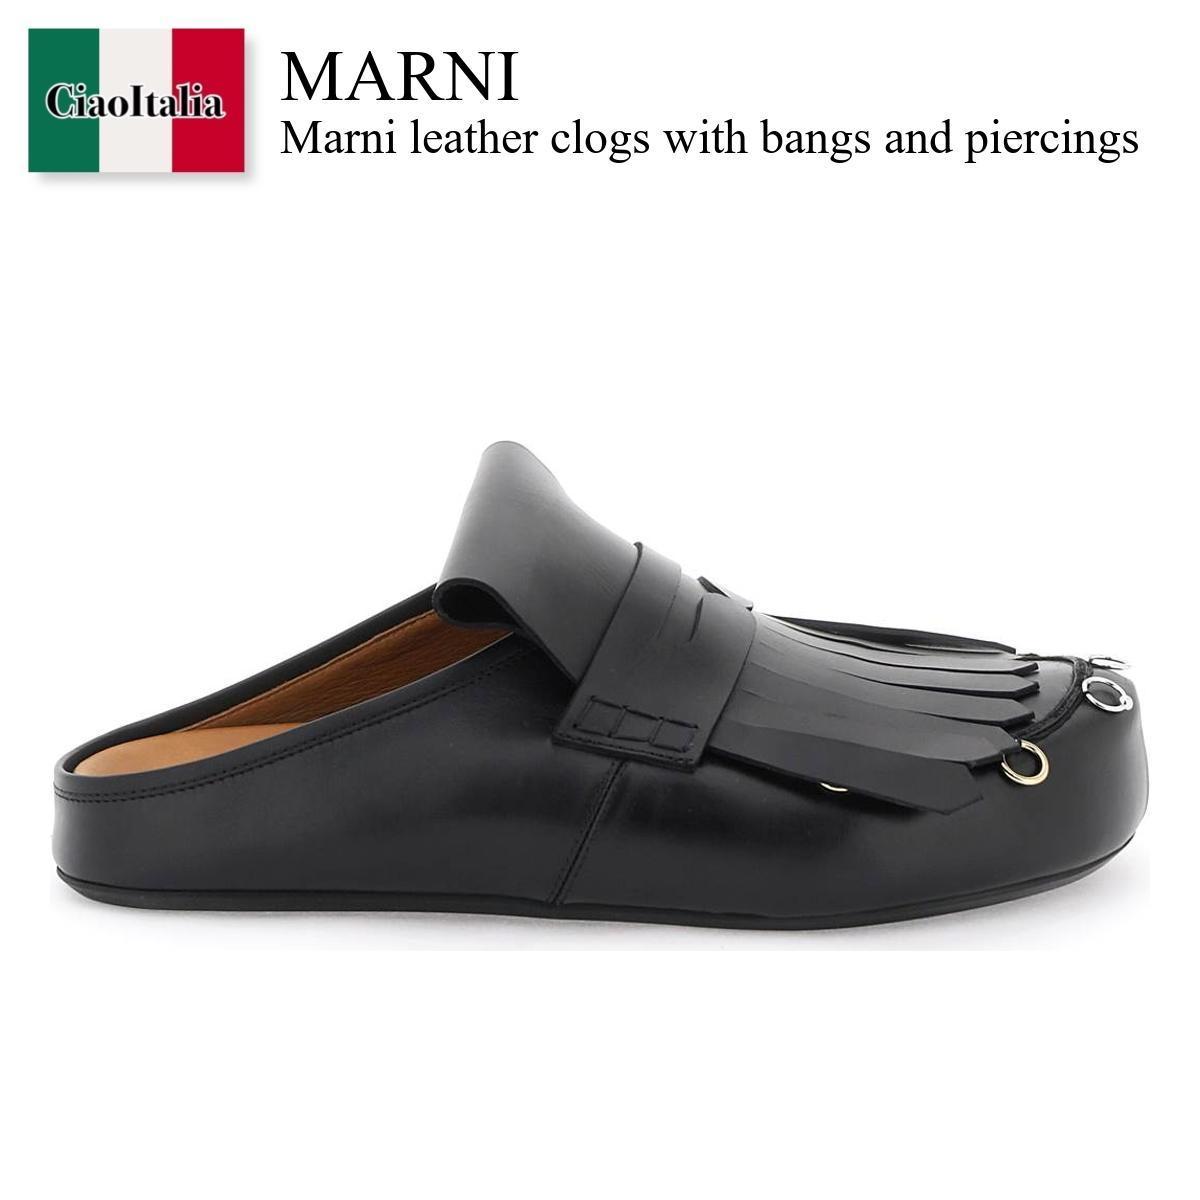 ޥ / Marni Leather Clogs With Bangs And Piercings / SBMR003300P5088 / SBMR003300P5088 00N99 / SBMR003300P508800N99 /  / סVIPס֤㤤ʪݡȡ